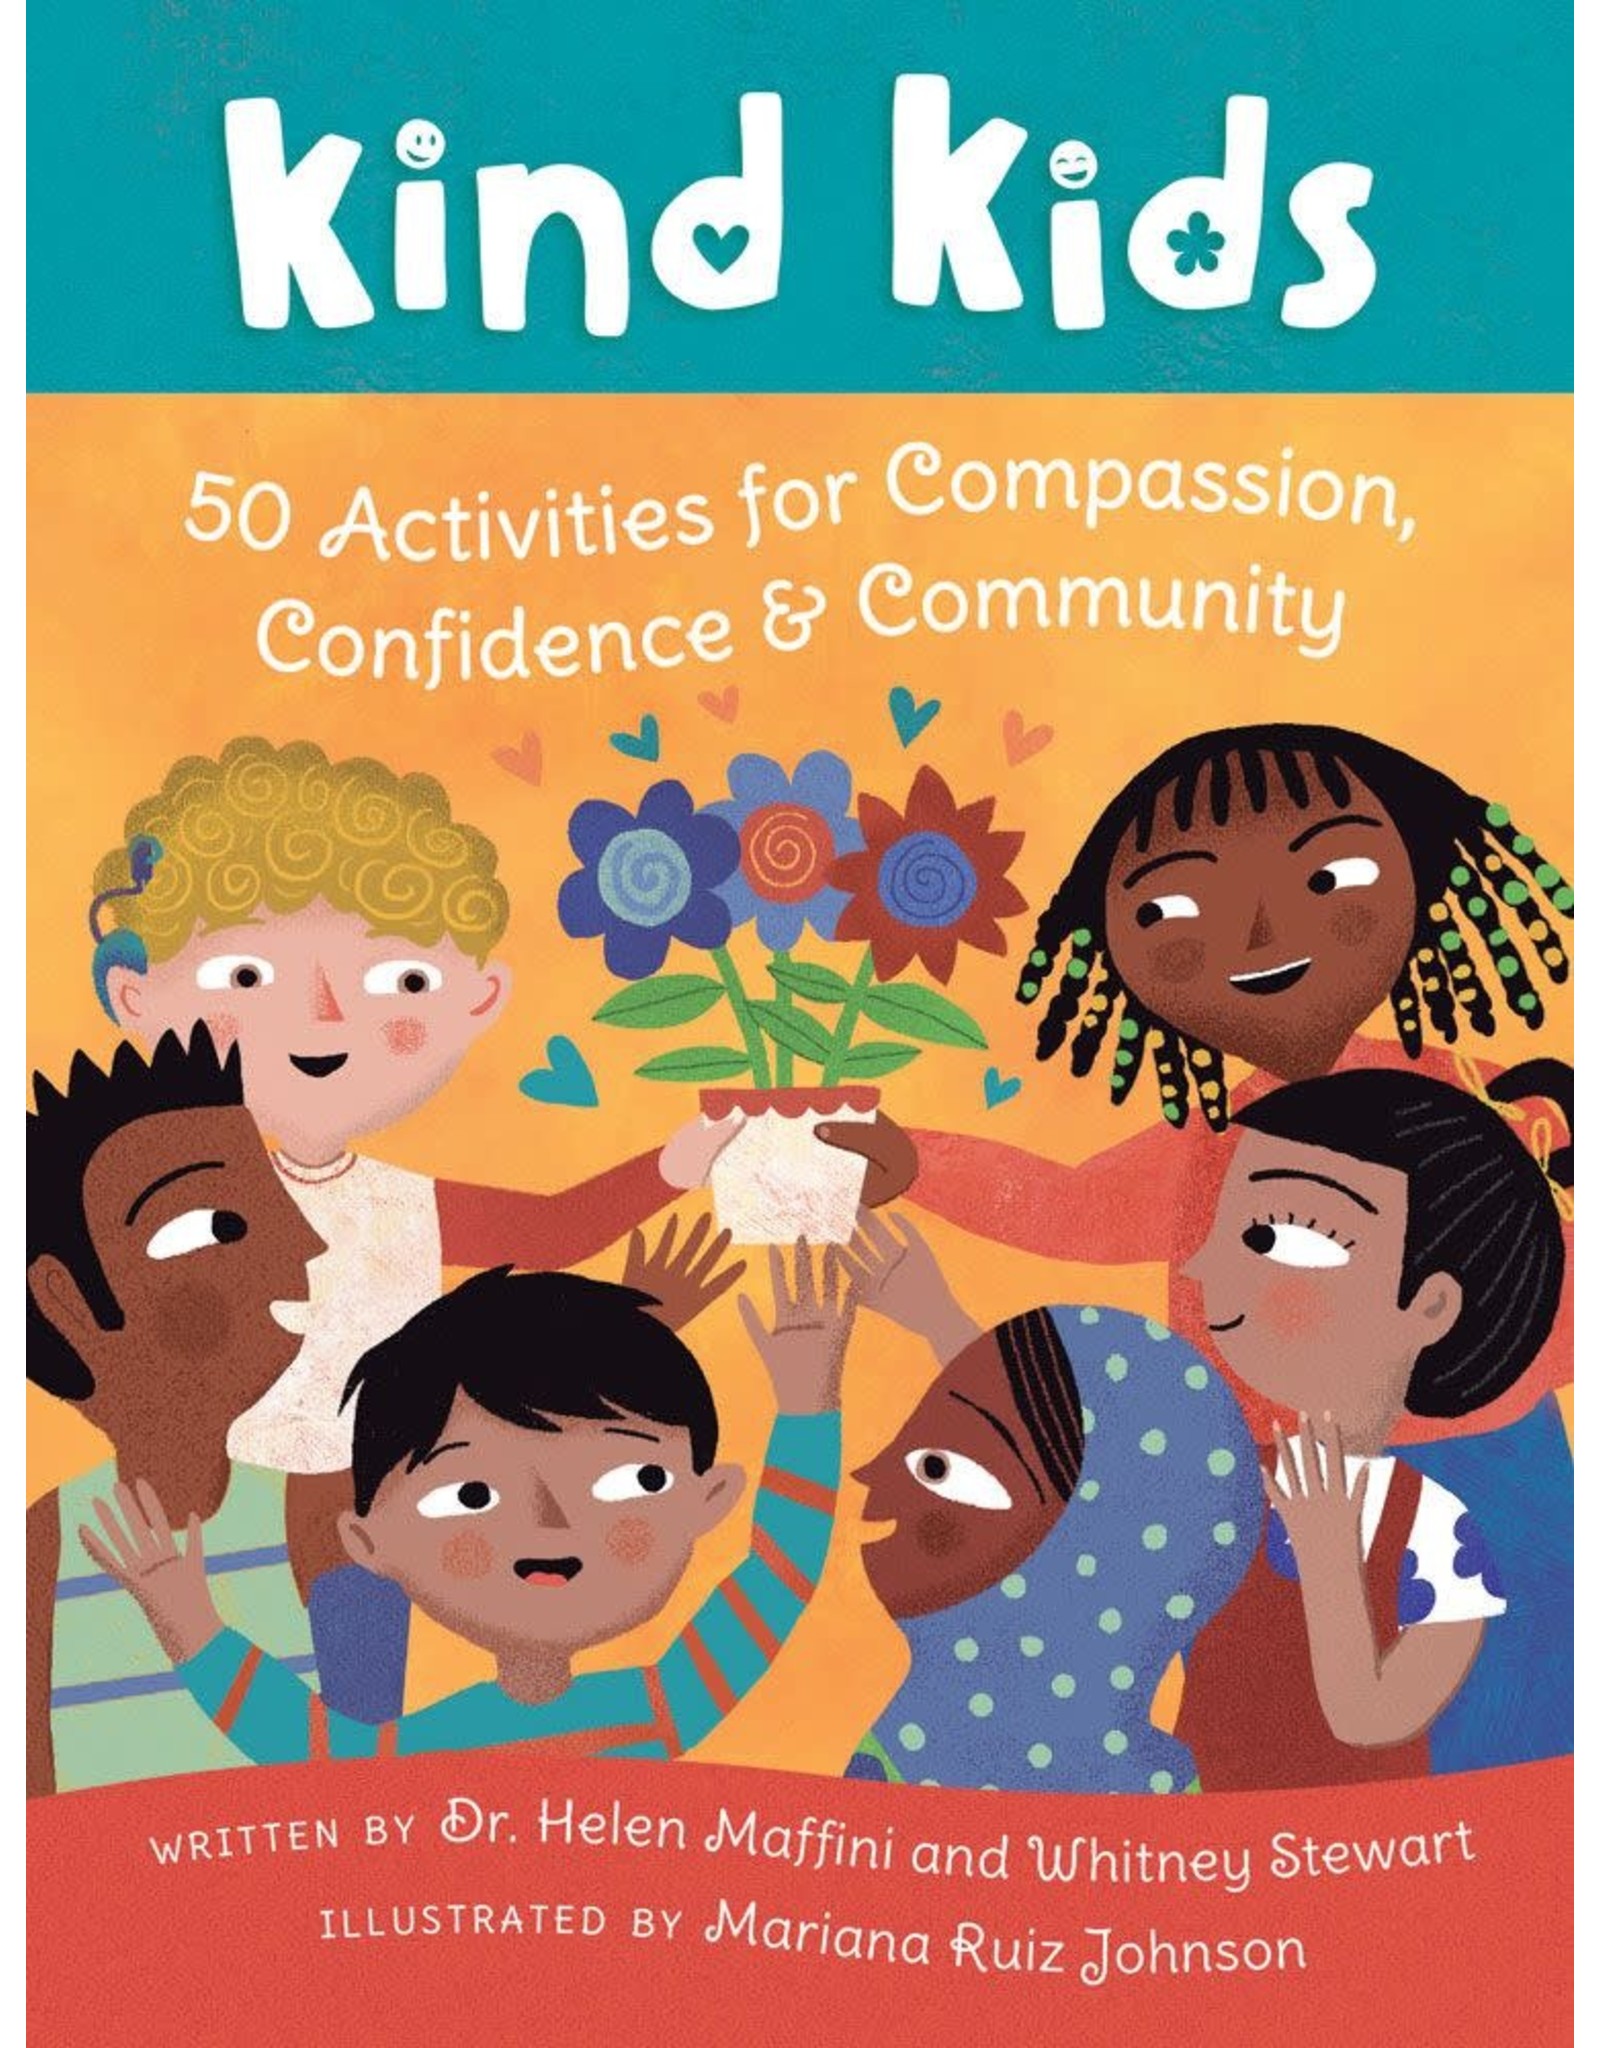 Kind Kids: 50 Activities for Compassion, Confidence & Community, Card Deck